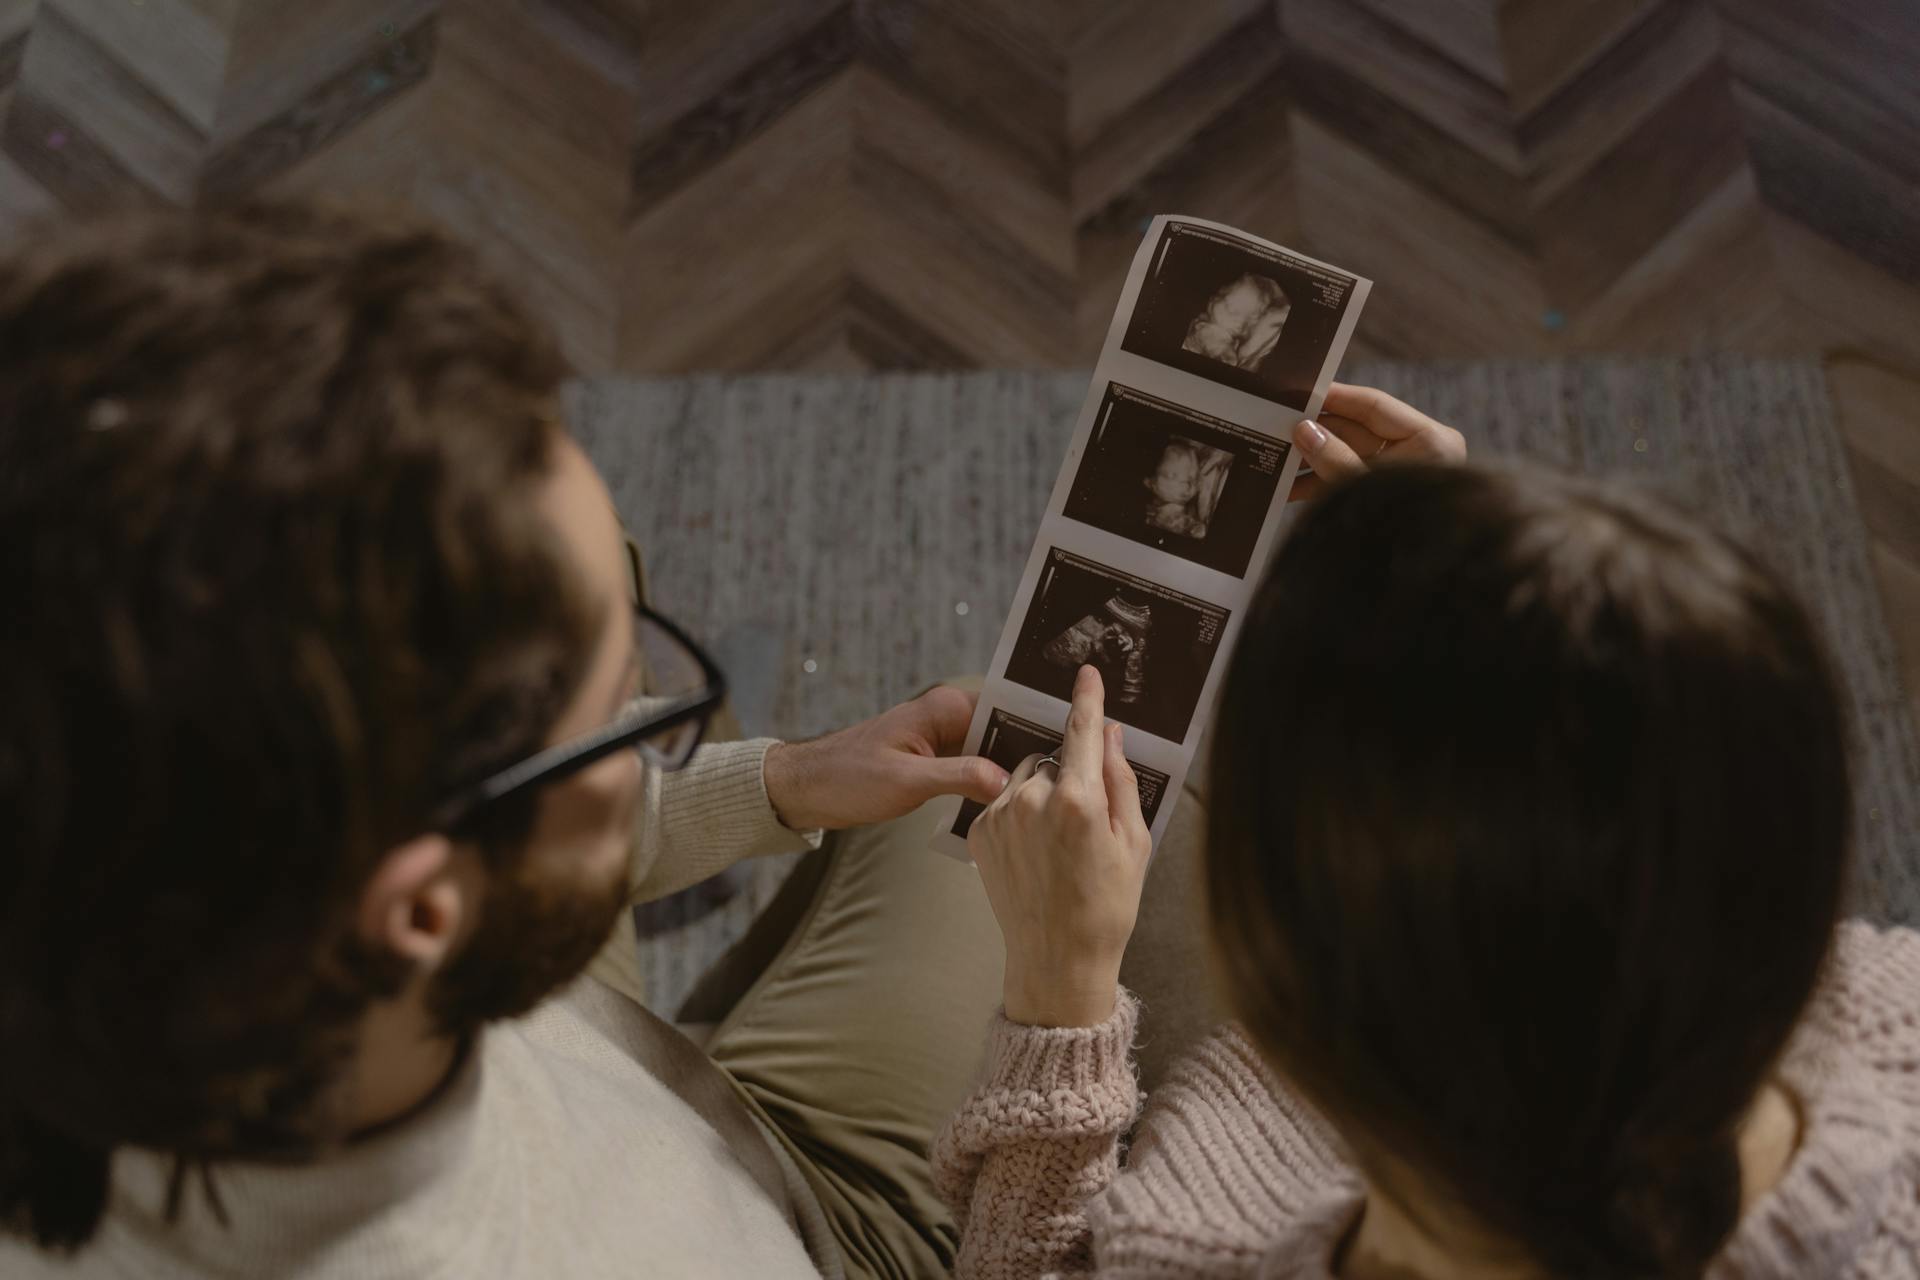 A couple looking at sonogram photos | Source: Pexels